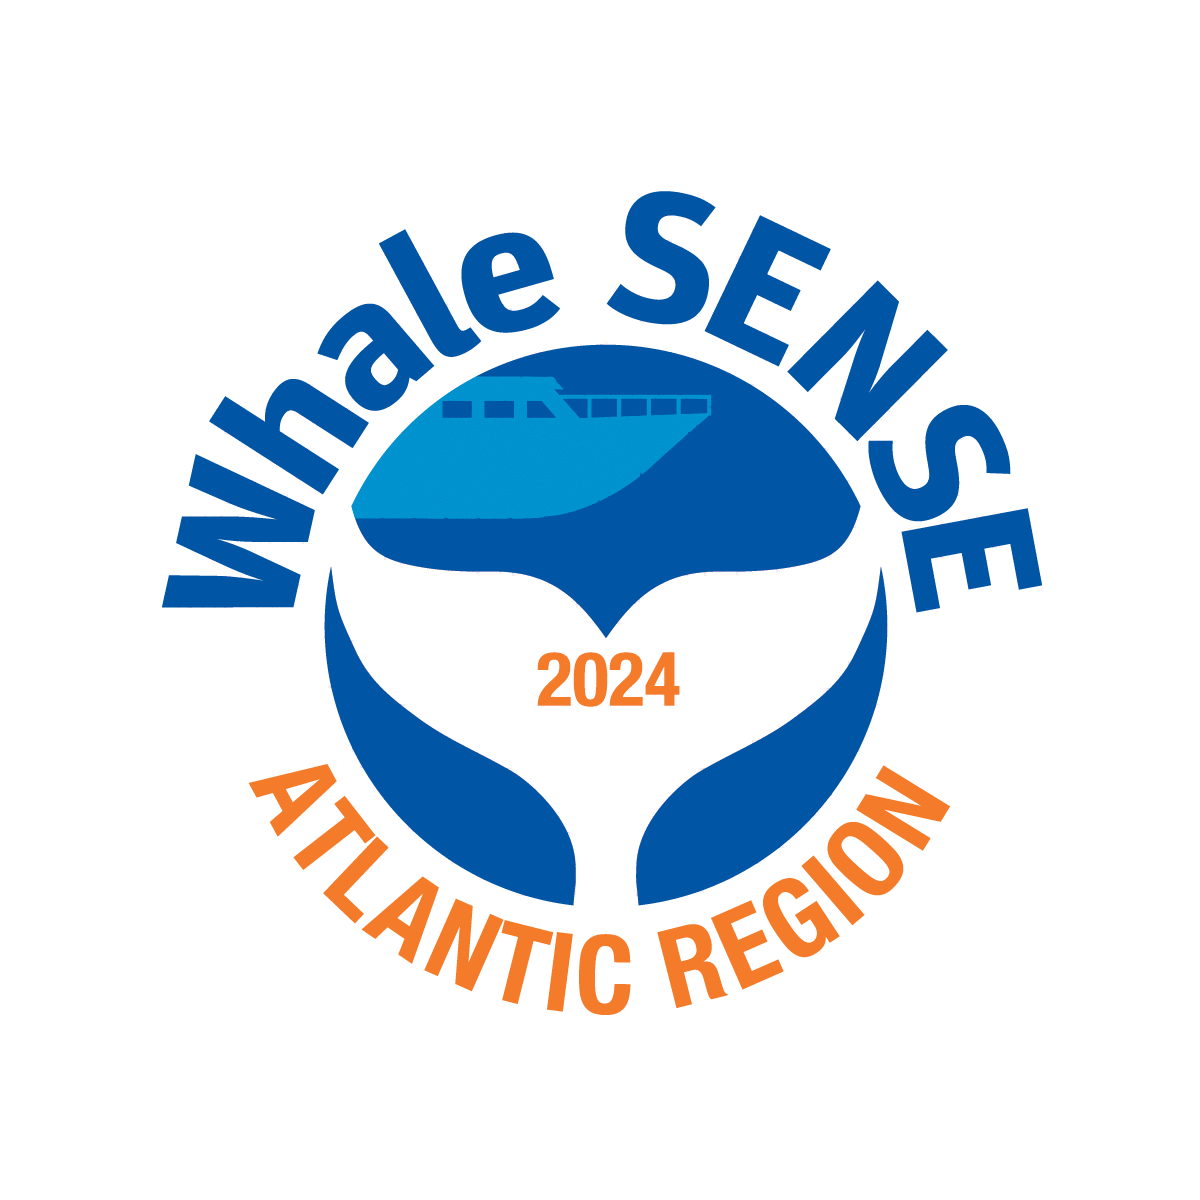 Whale SENSE Atlantic Region 2024 Logo of whale tail and boat.